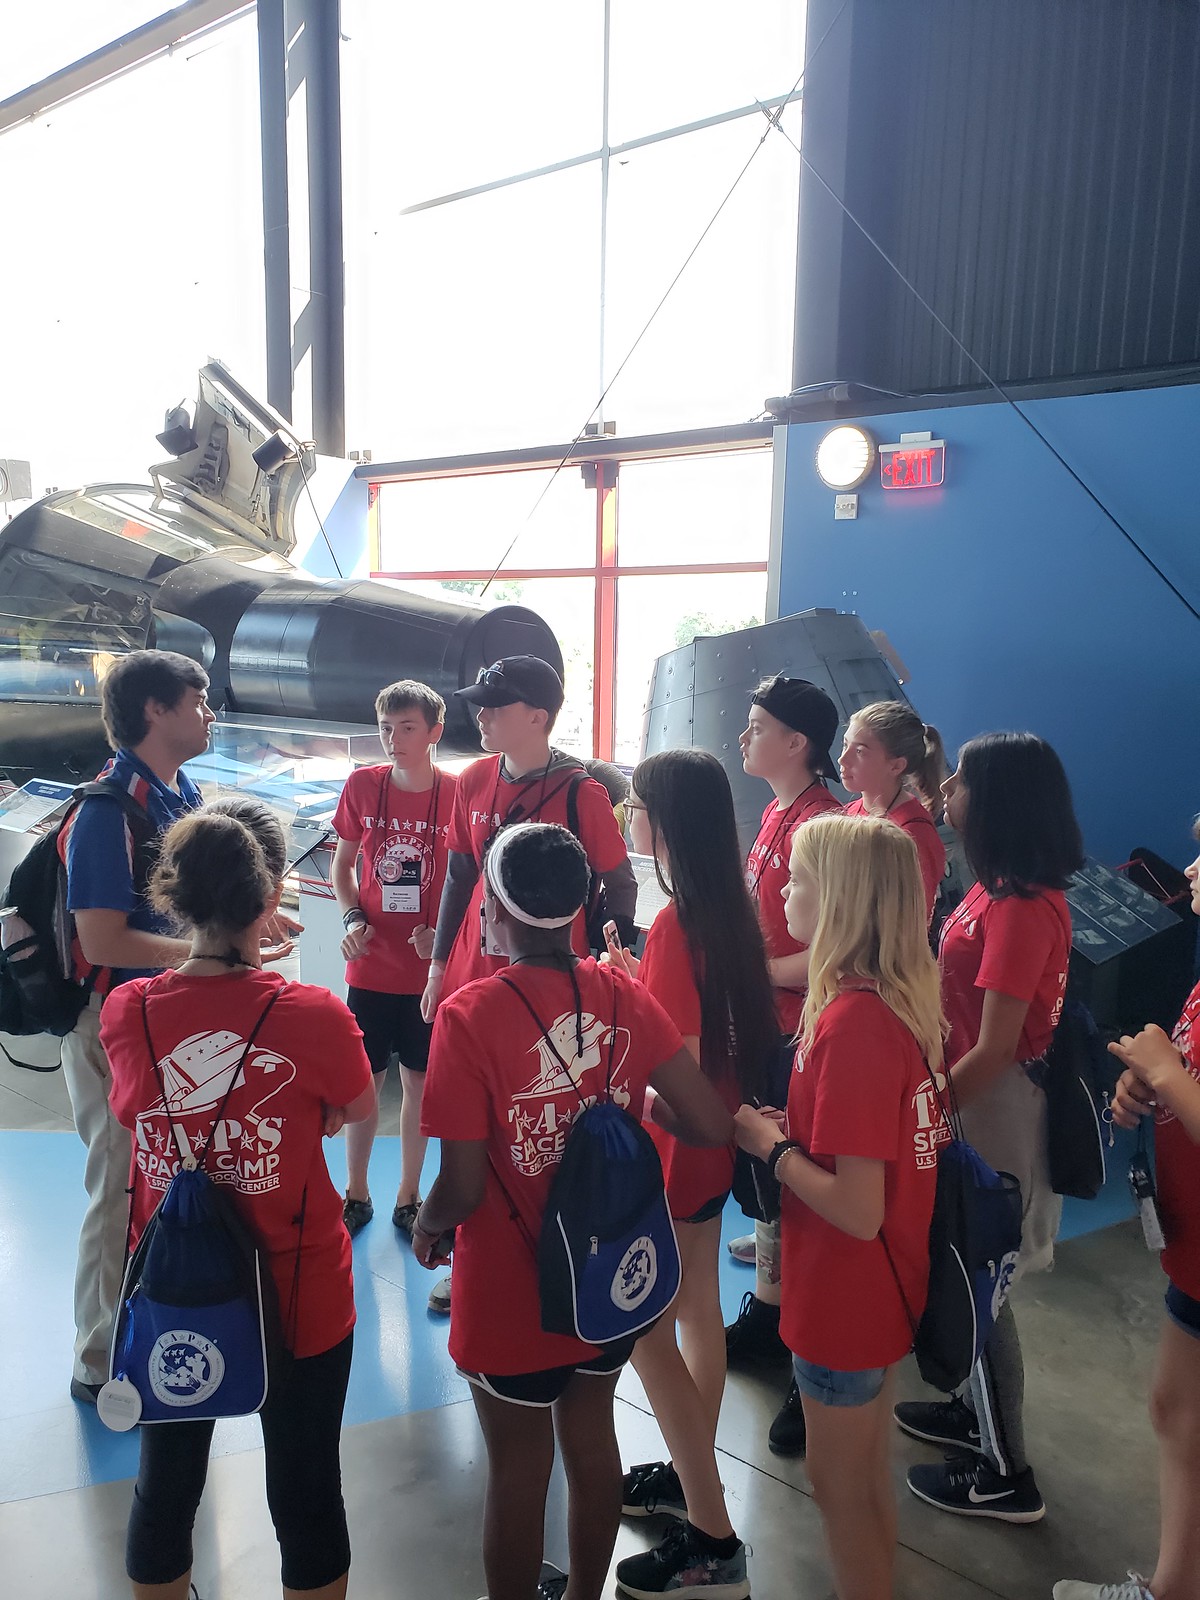 2019_YP_Space Camp 32